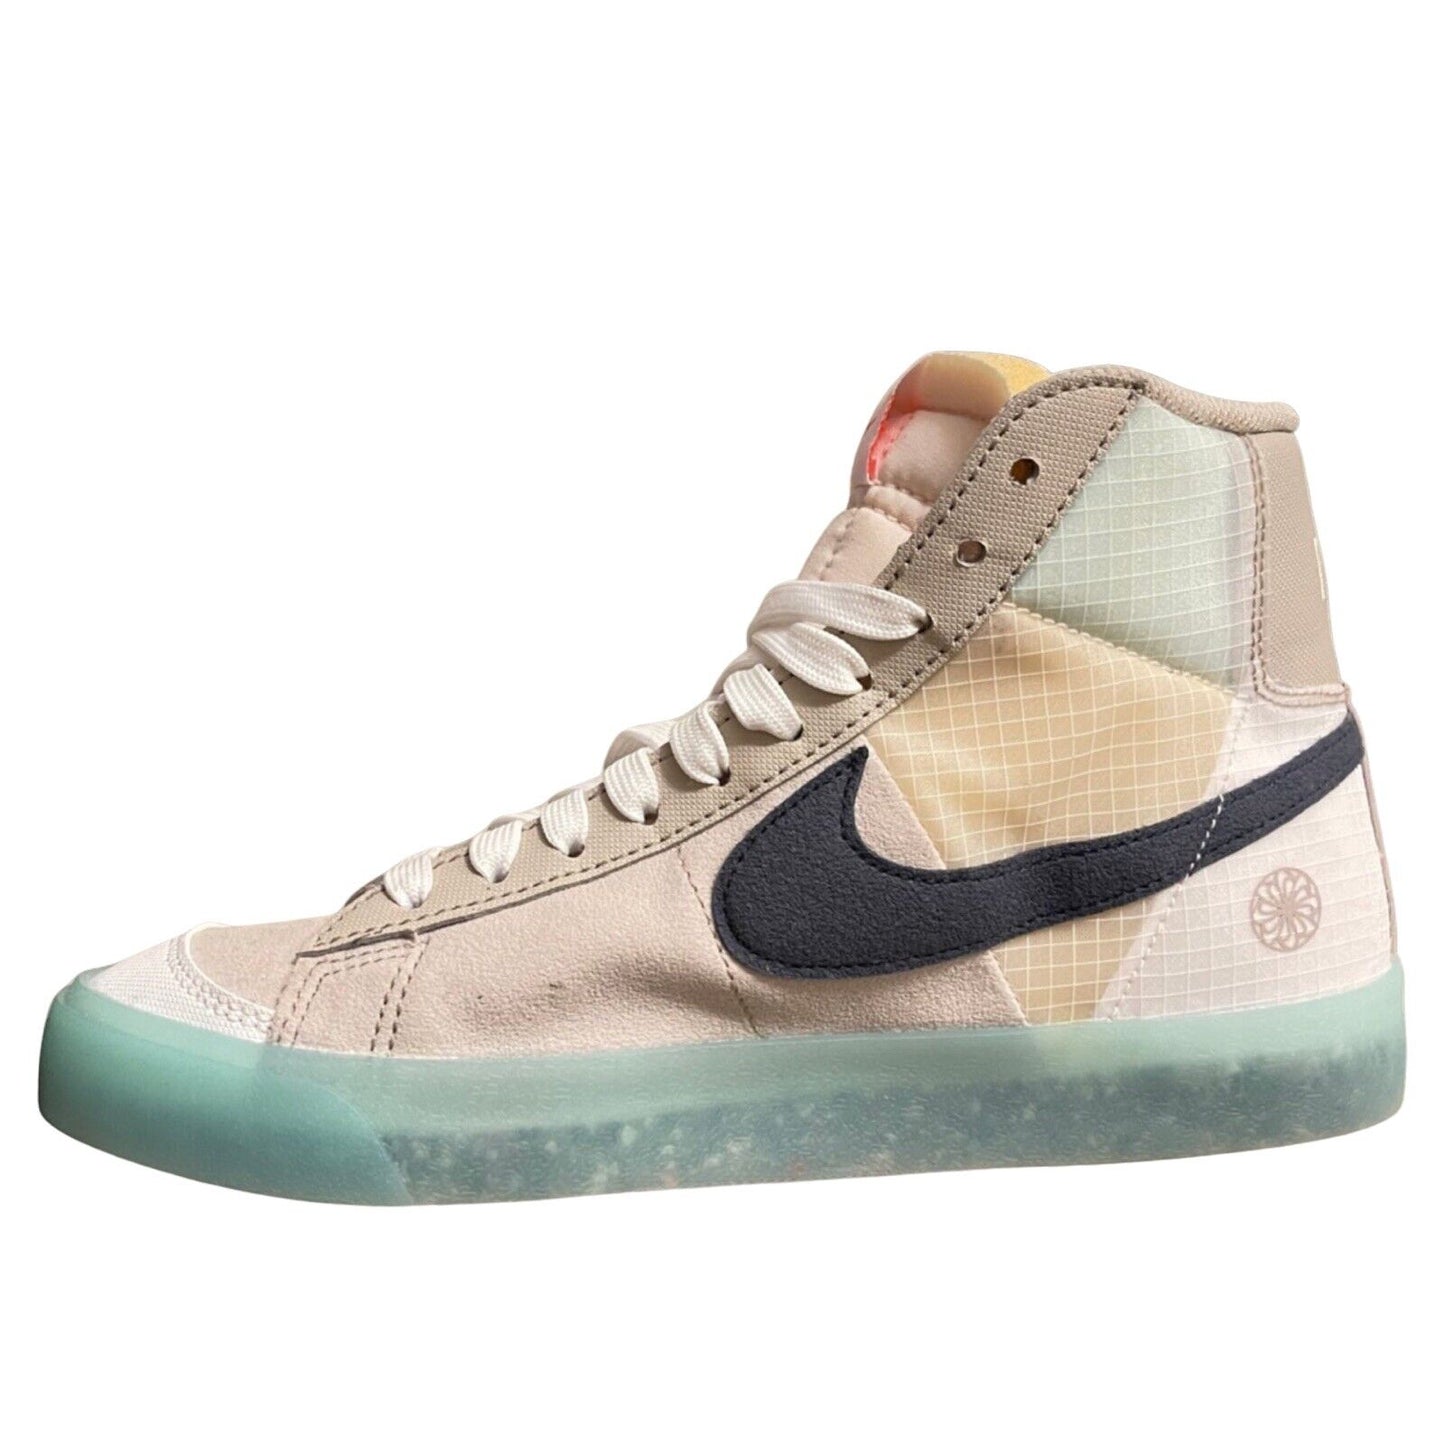 Nike Blazer Mid 77 GS Move To Zero Youth 6Y SINGLE SHOE Right Foot One Sneaker